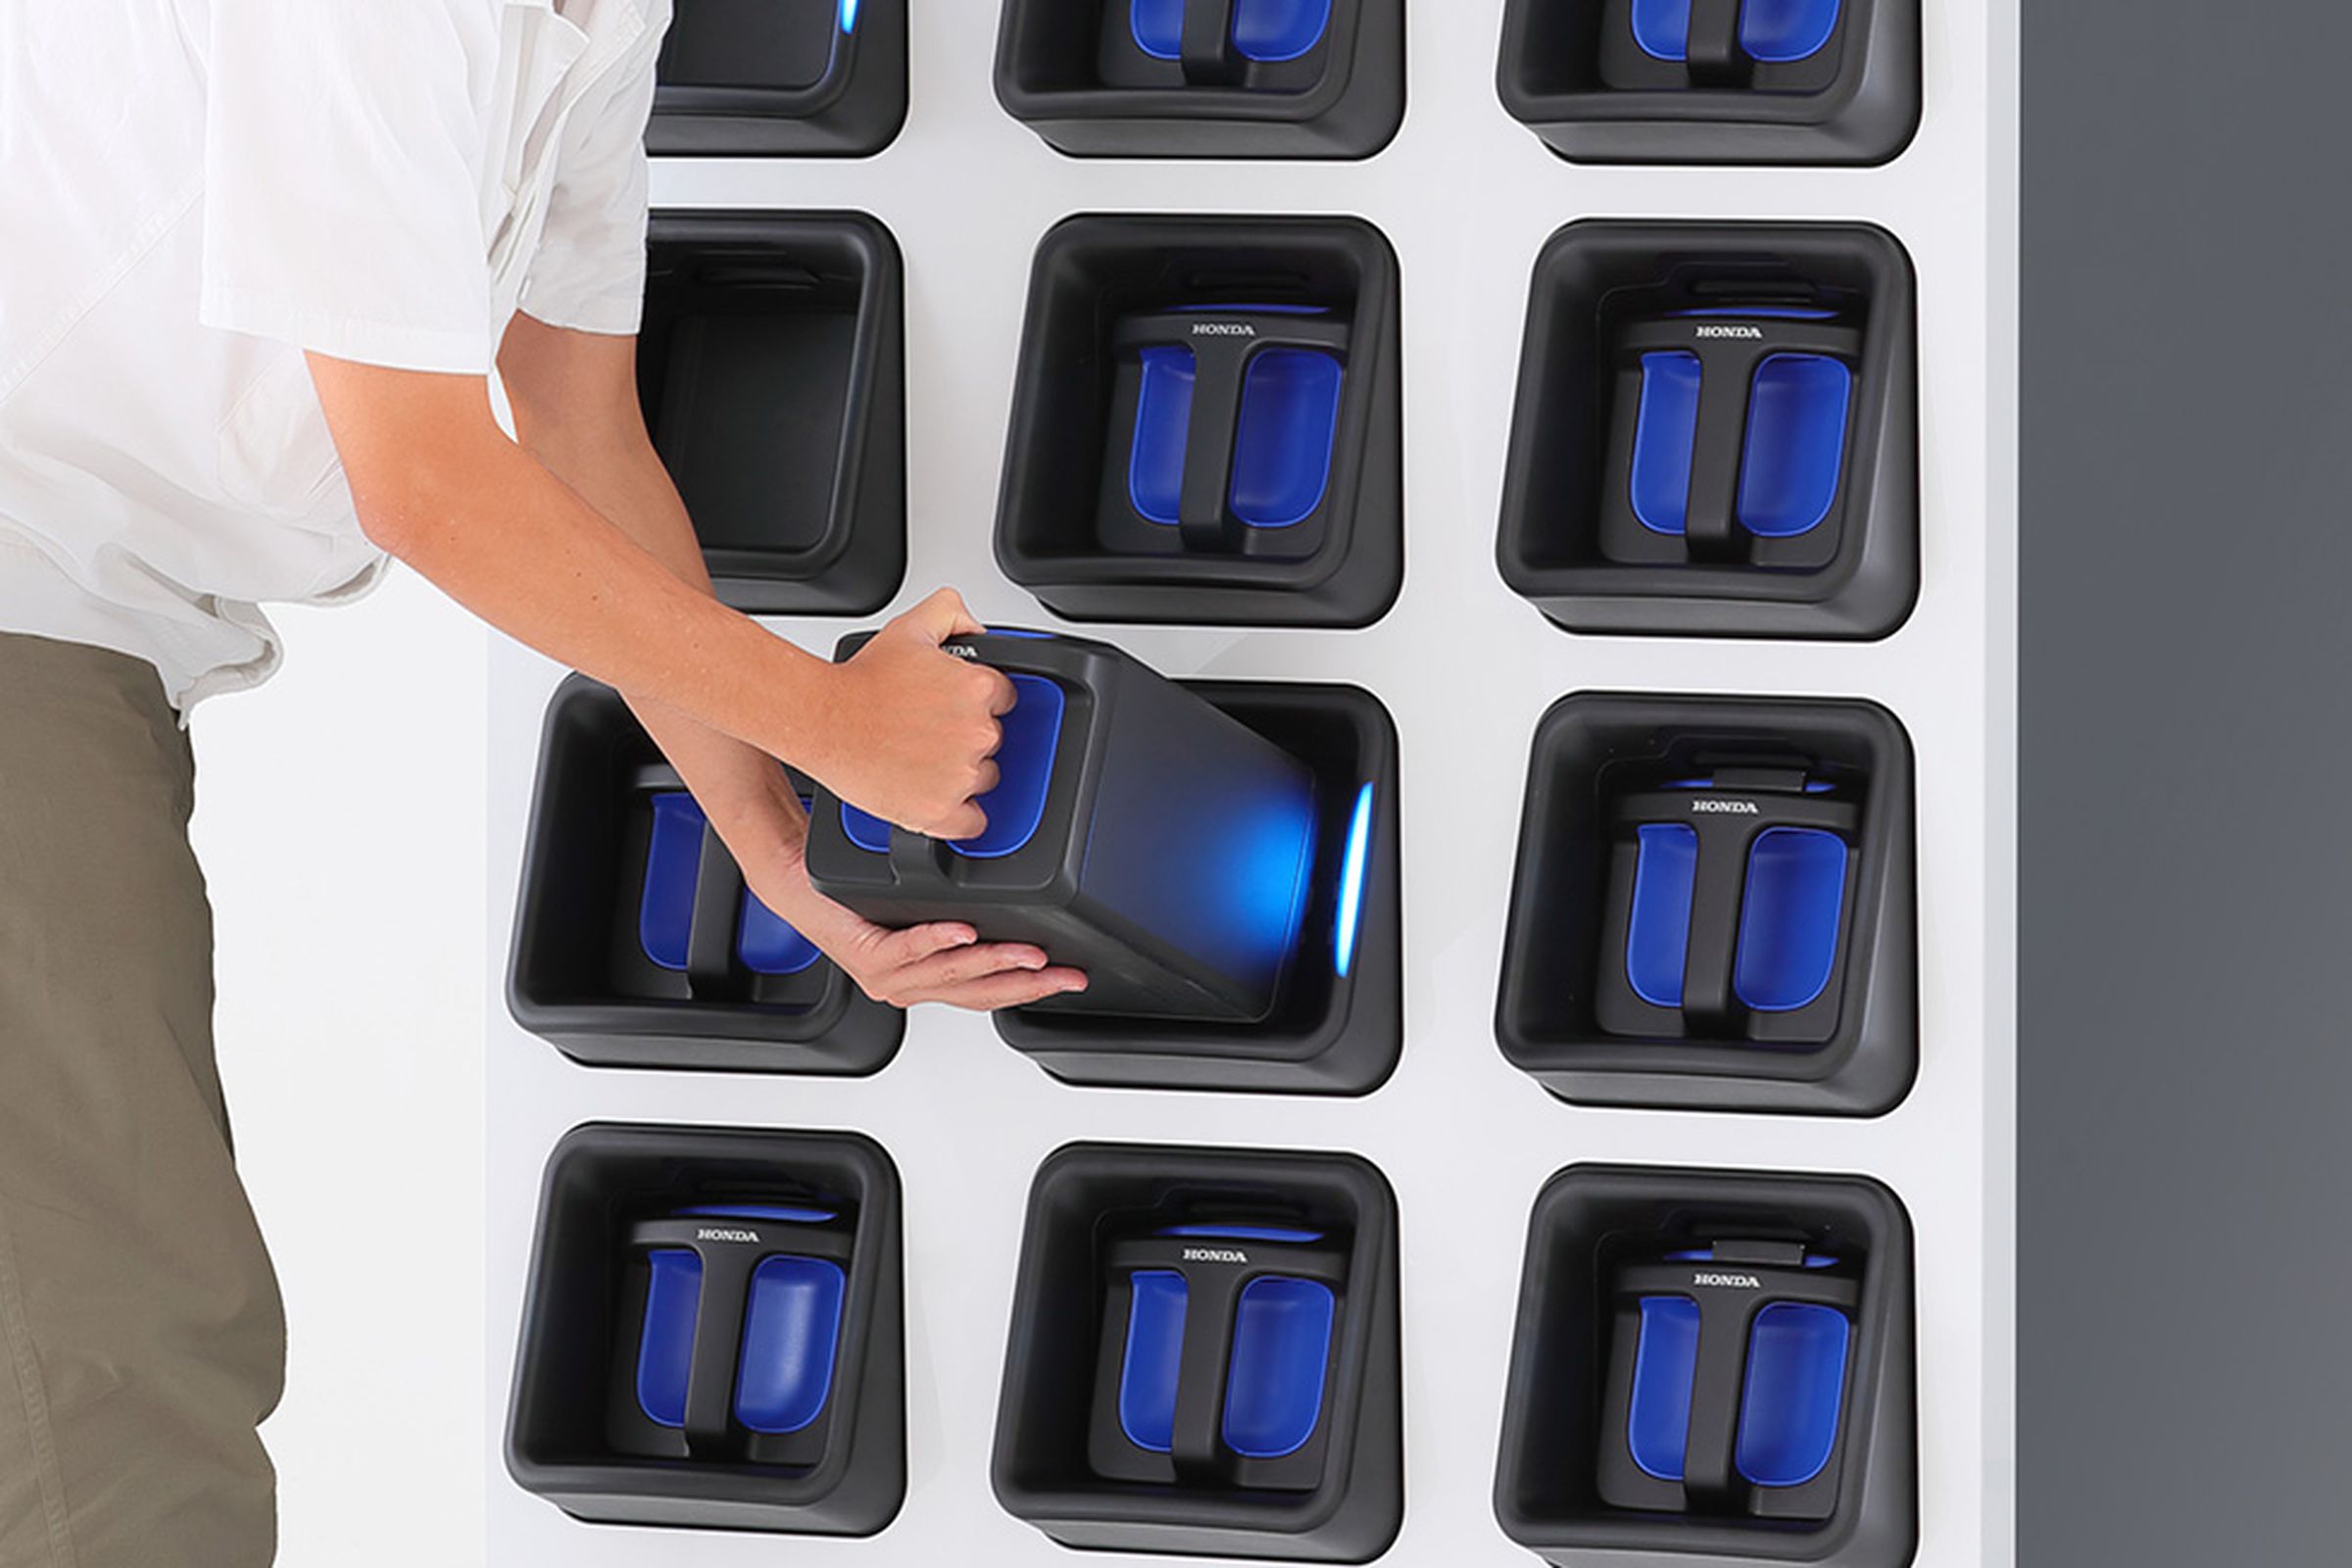 A man is pulling out a battery pack from an angled slot amongst a grid of slots that have the blue packs nestled in them.